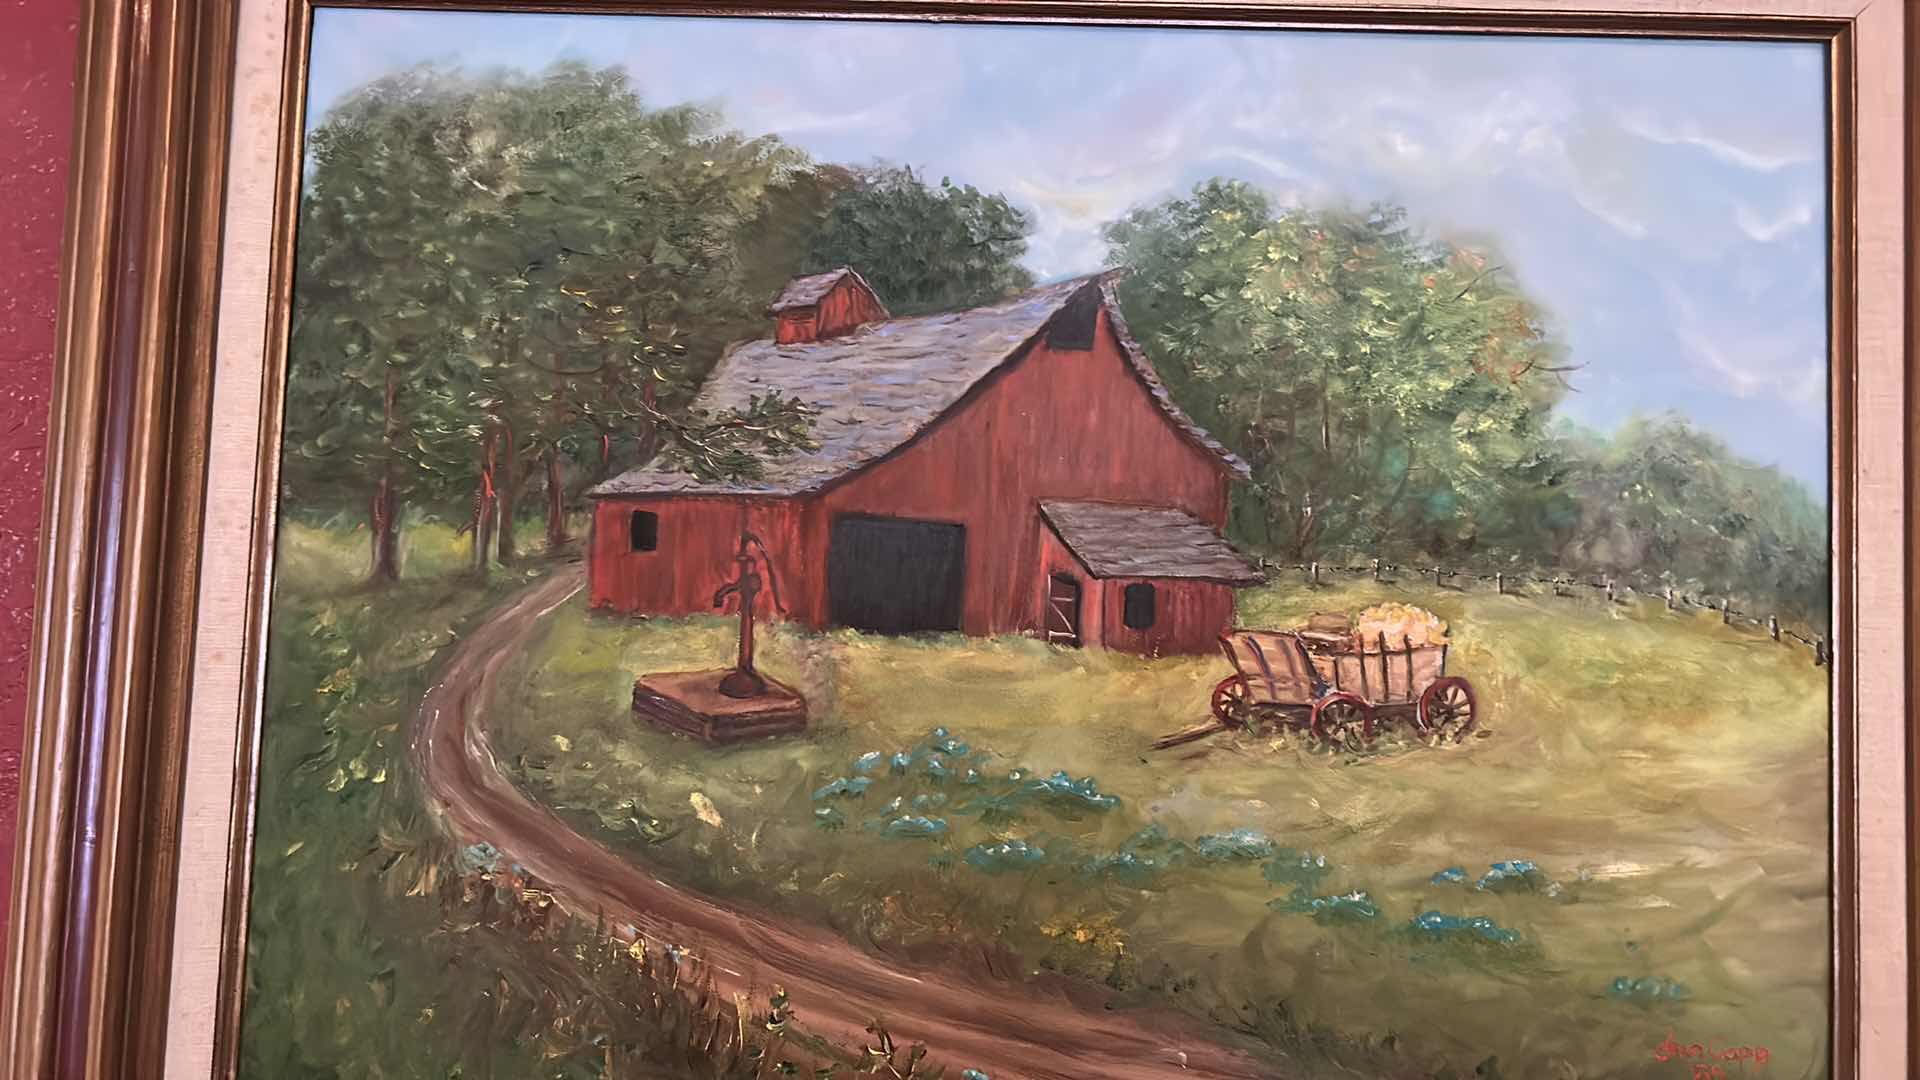 Photo 2 of SIGNED OIL ON CANVAS “RED BARN” WOOD FRAMED 31” x 25”